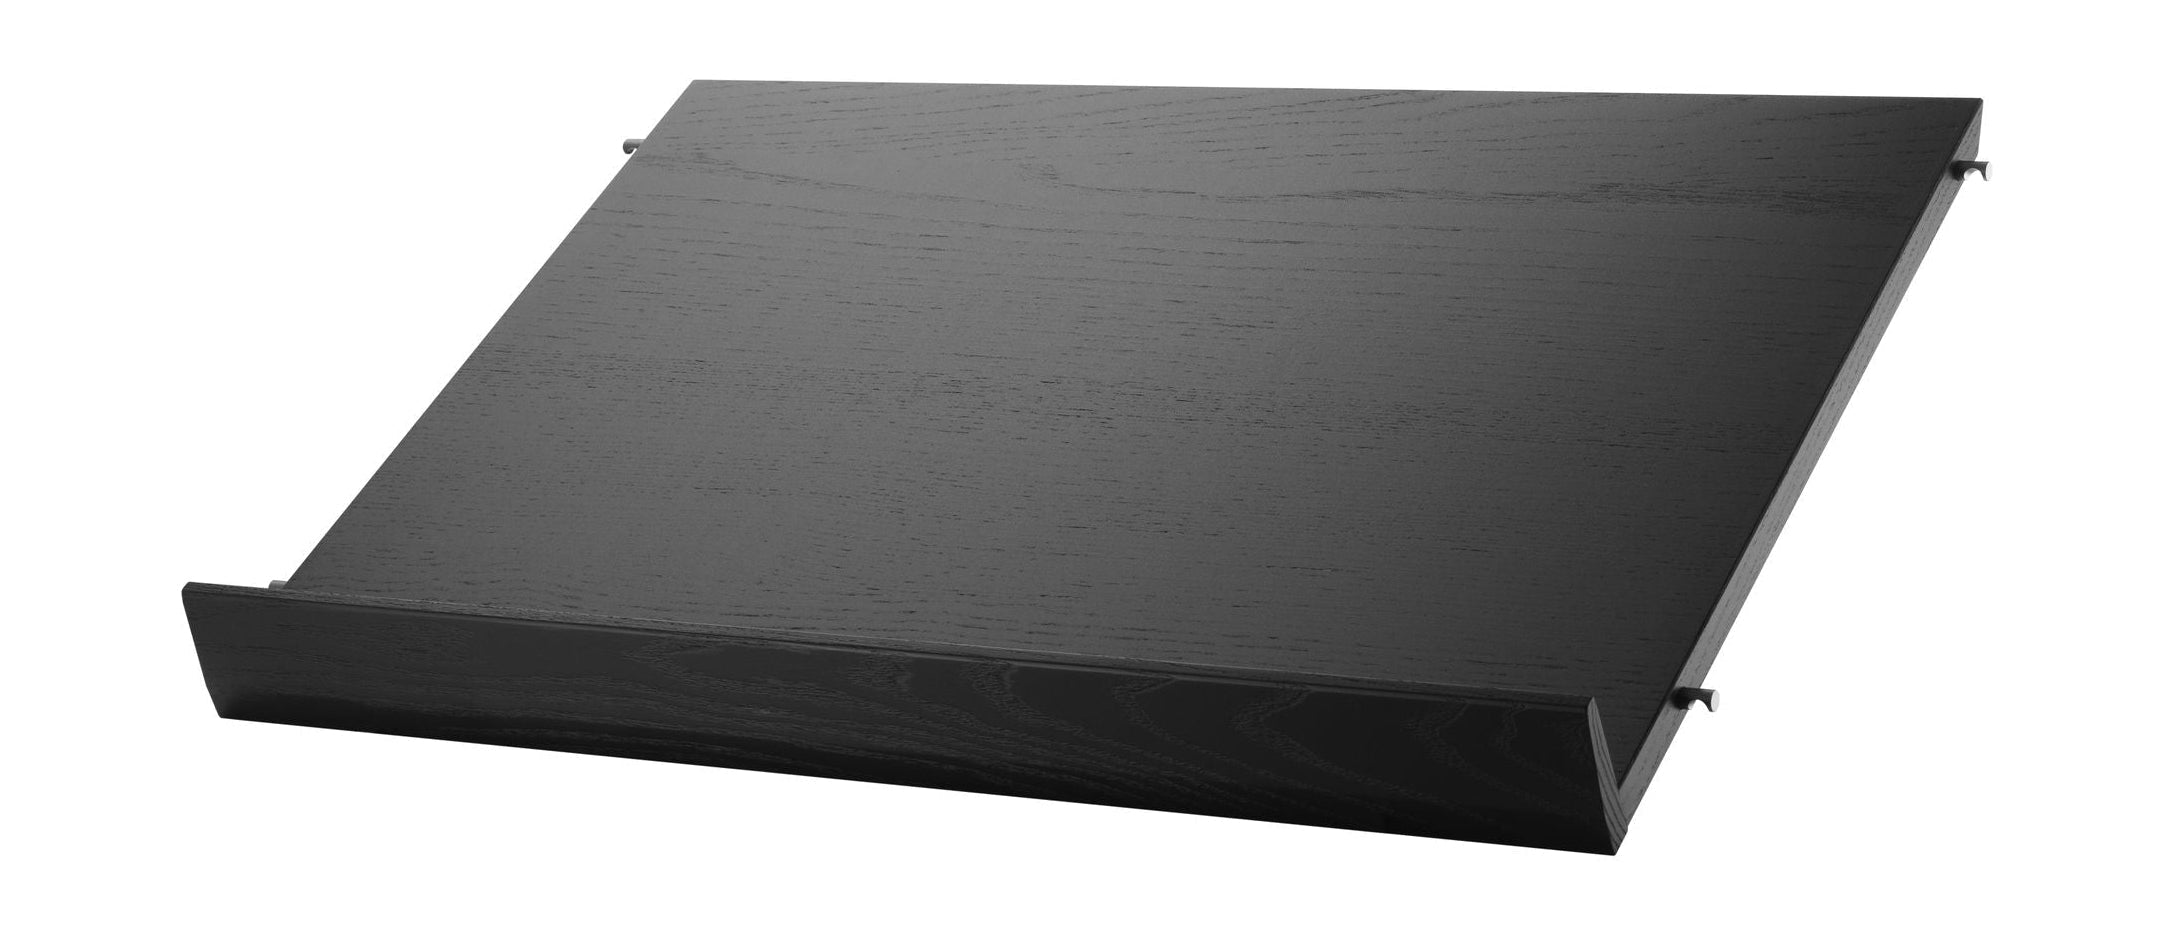 String Meble System System Magazyn Tray Wood Black Bedained Ash, 30x58 cm